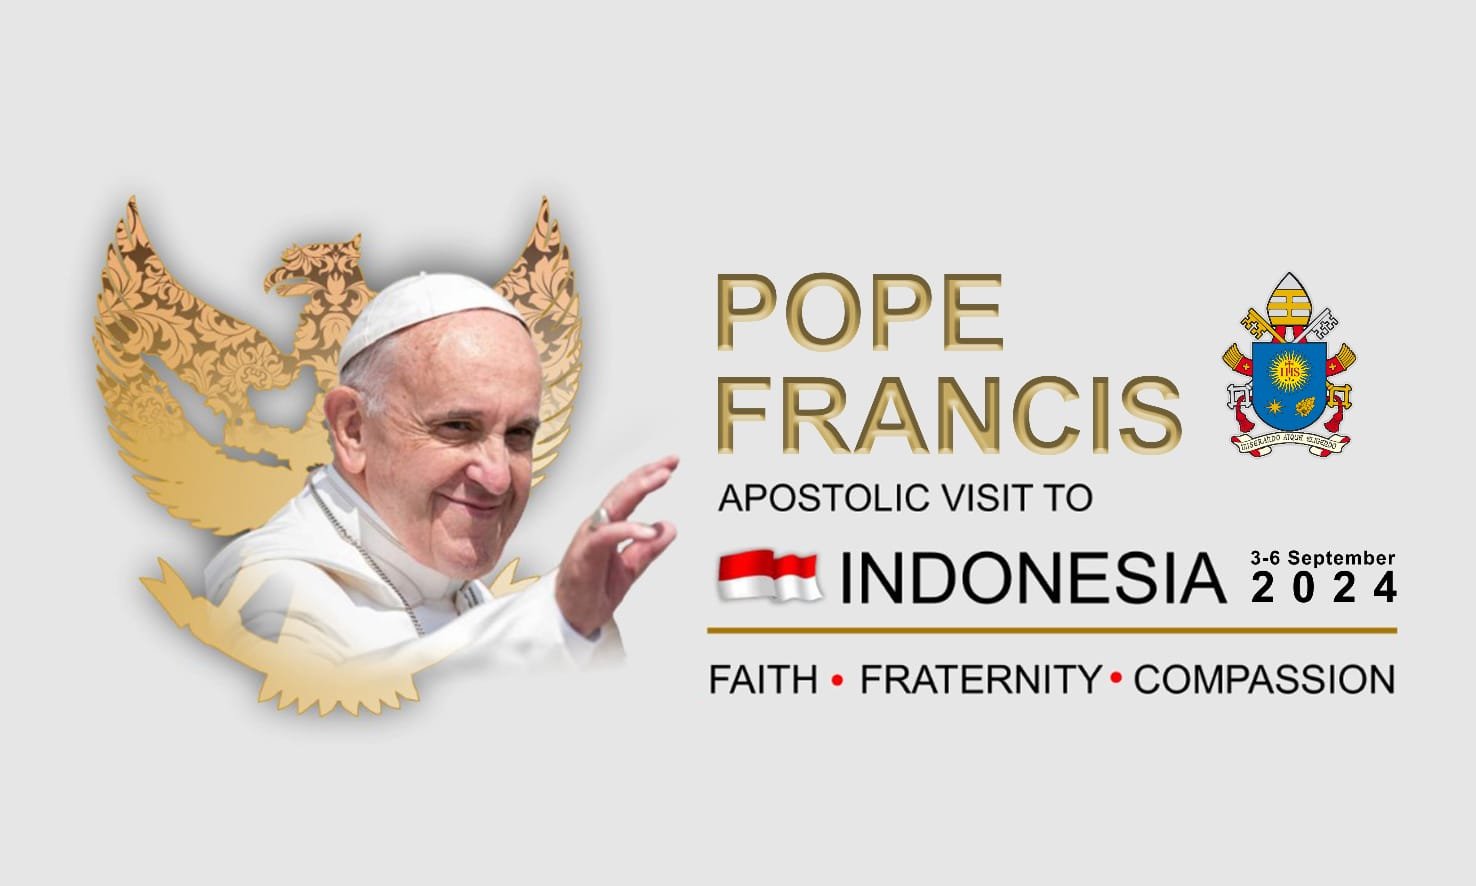 Vatican publishes logos, themes for September papal trip to Asia